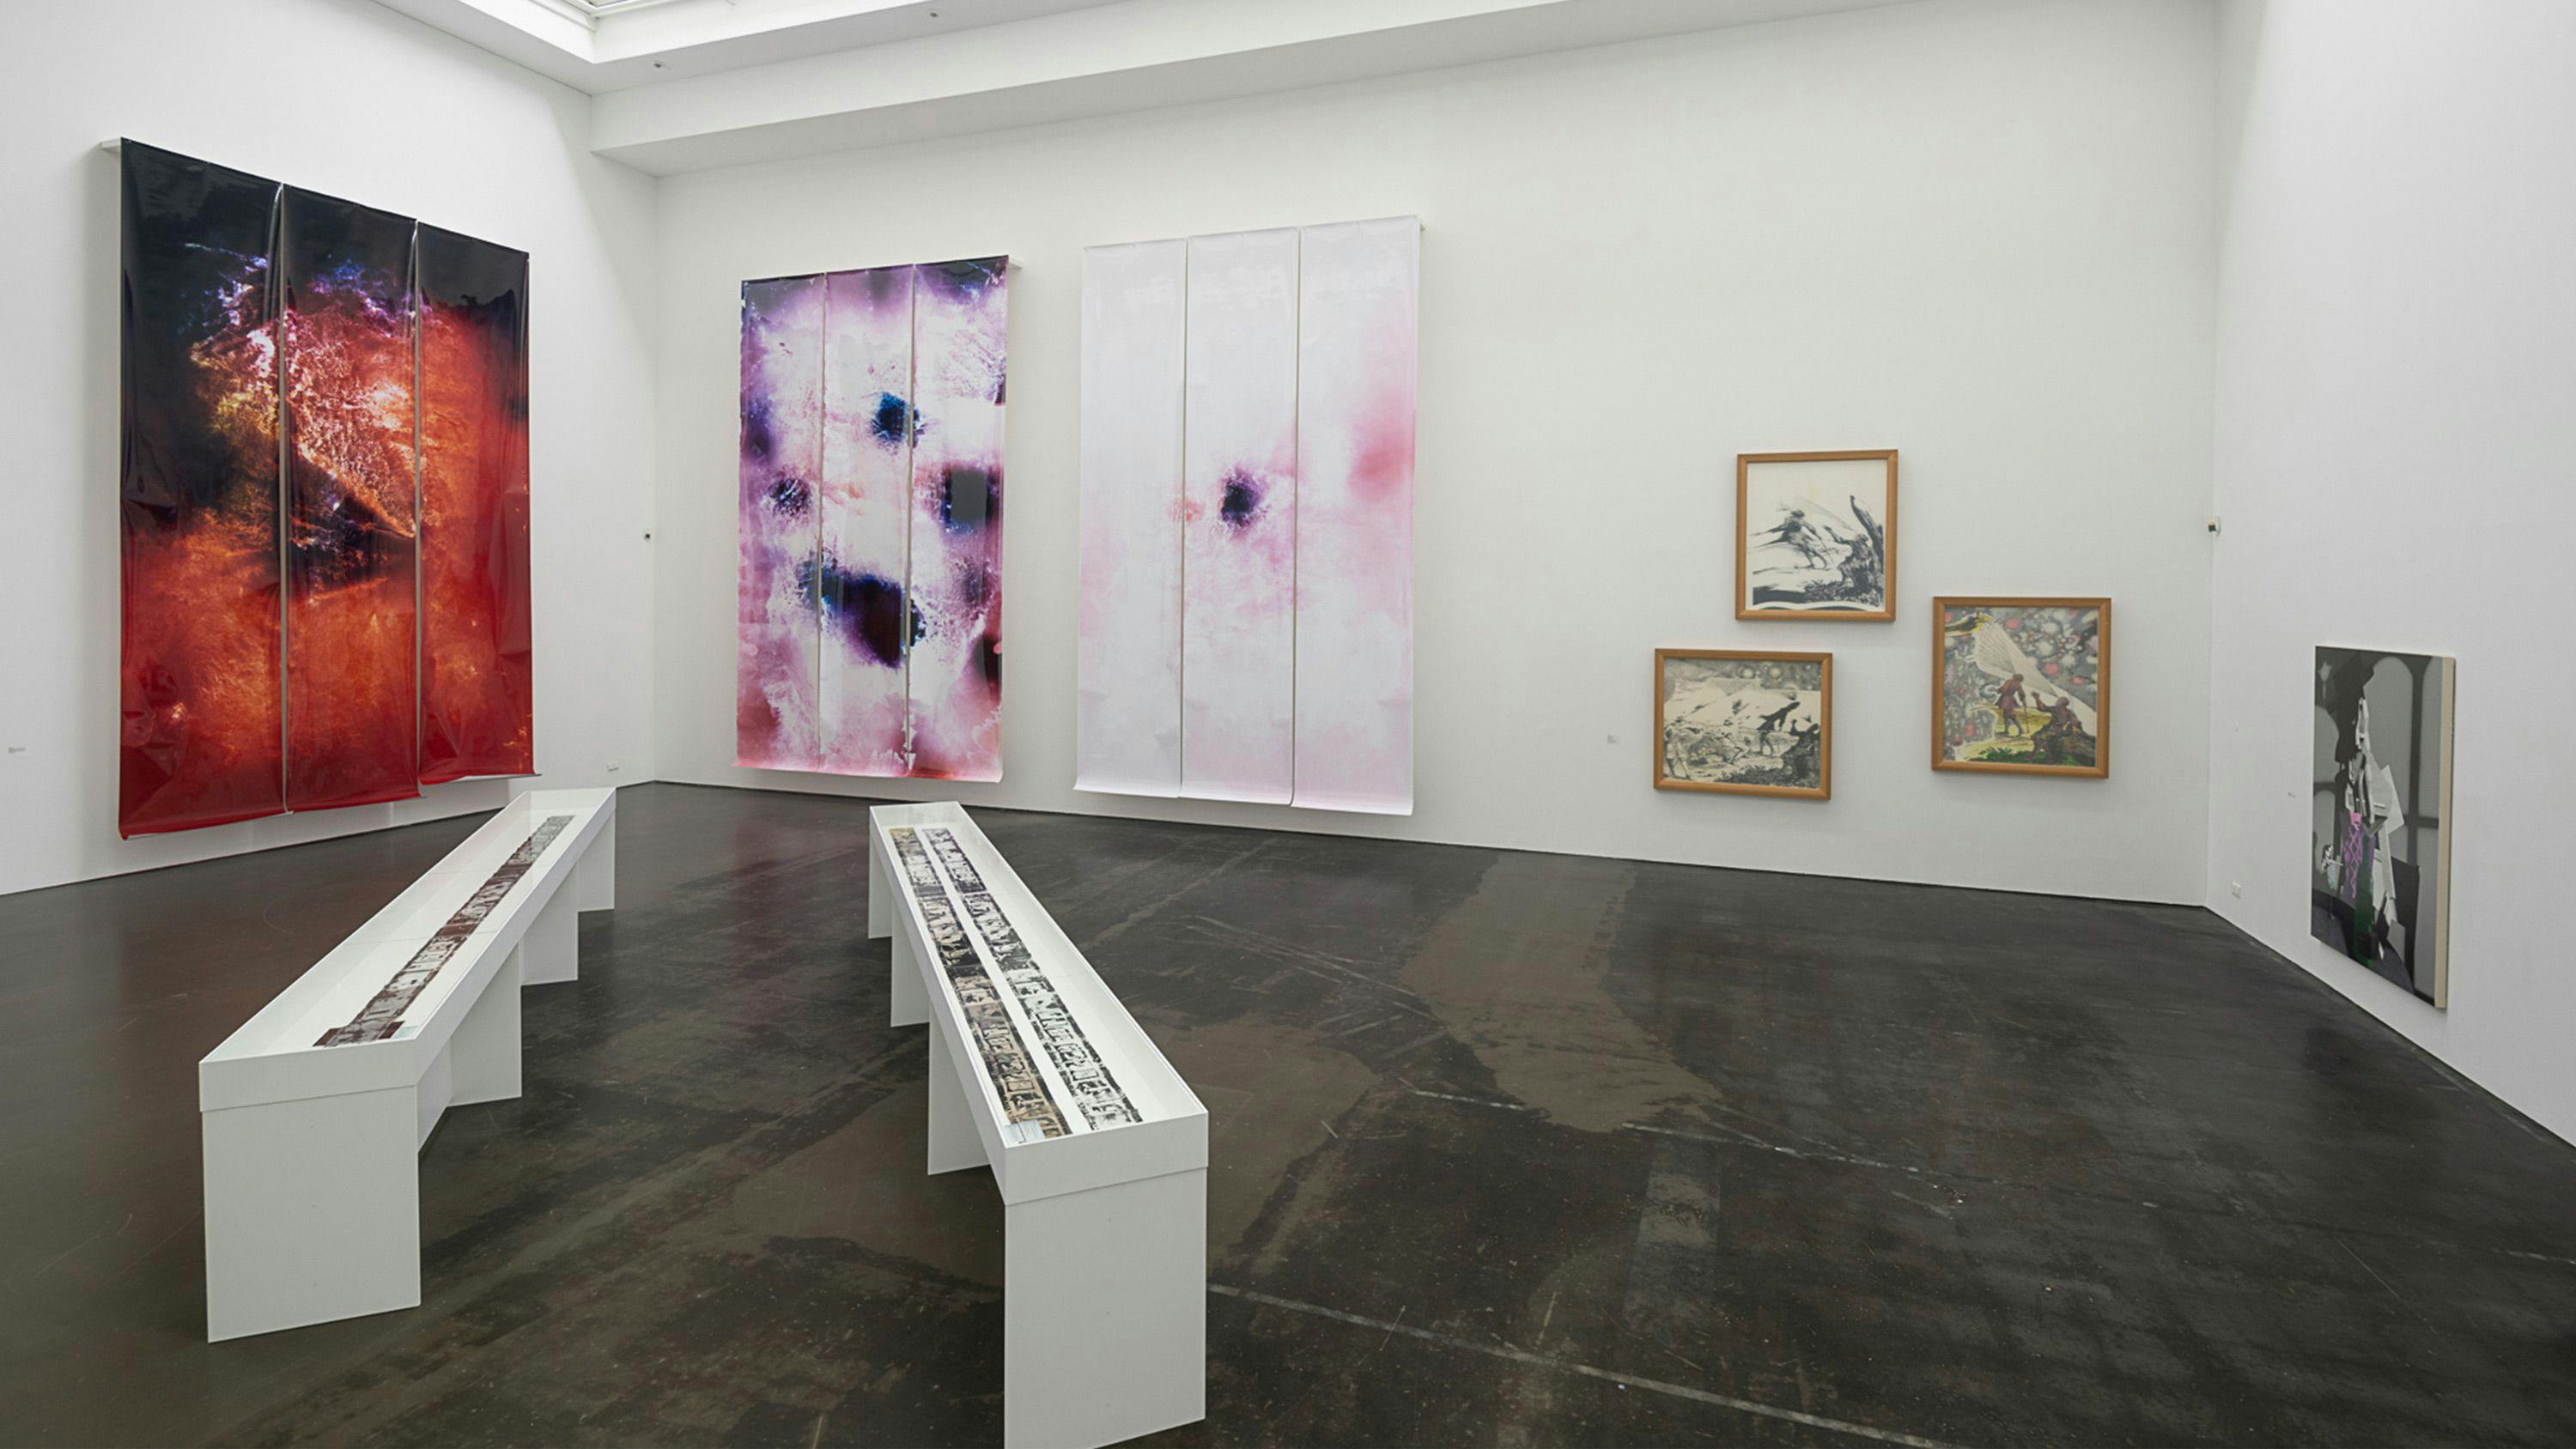 Installation view of Productive Image Interference: Sigmar Polke and Artistic Perspectives Today, Kunsthalle Düsseldorf, dated 2021.